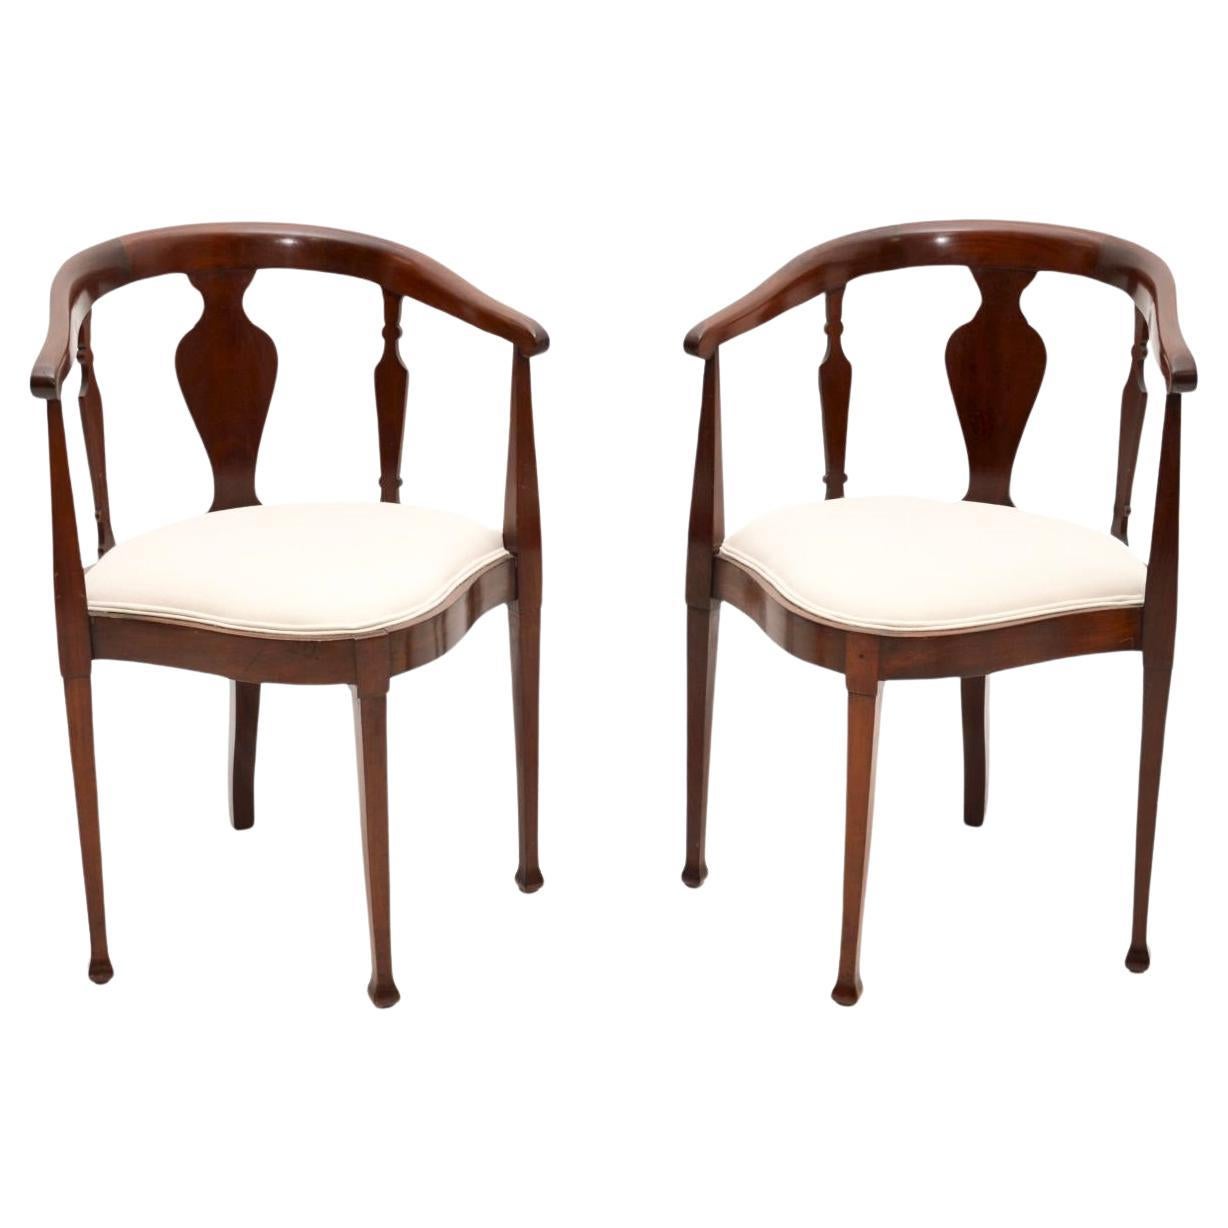 Pair of Antique Edwardian Corner Chairs For Sale